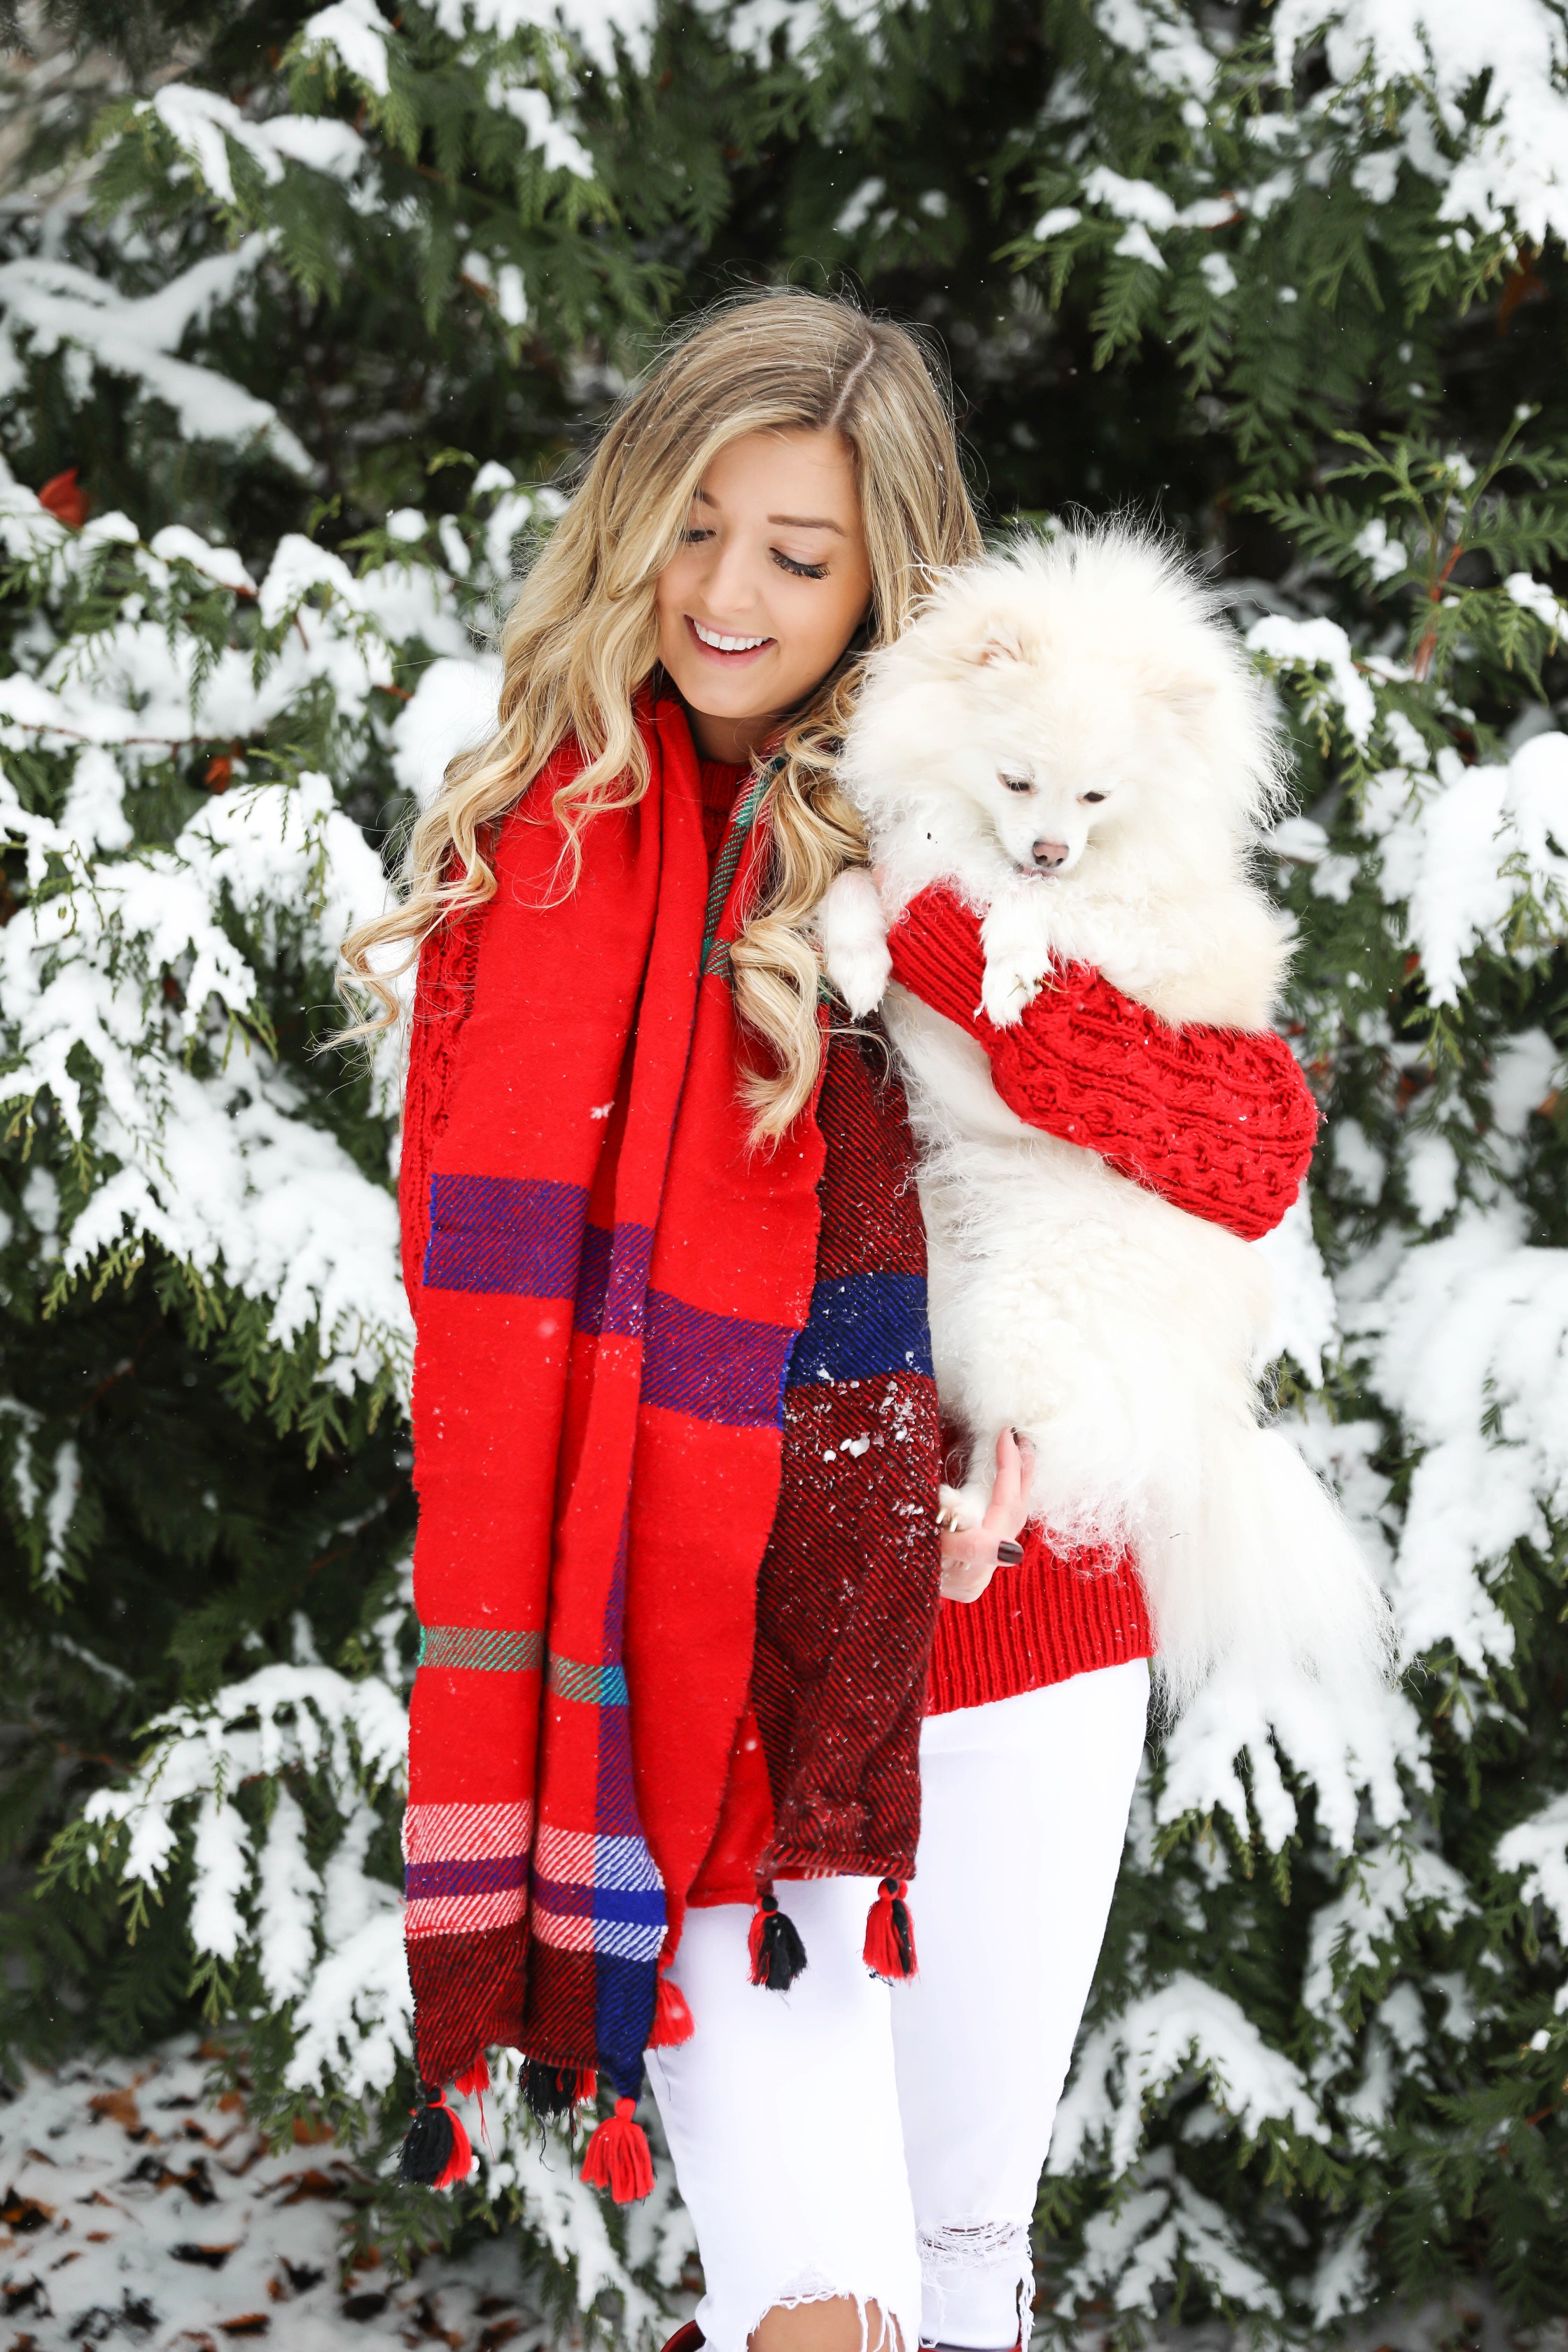 Christmas card photos in the snow! I took my holiday card photos with my cute little white pomeranian. I love when people do their holiday pictures with their dog! This is such a cute winter outfit idea for the holidays! Details on fashion blog daily dose of charm by lauren lindmark